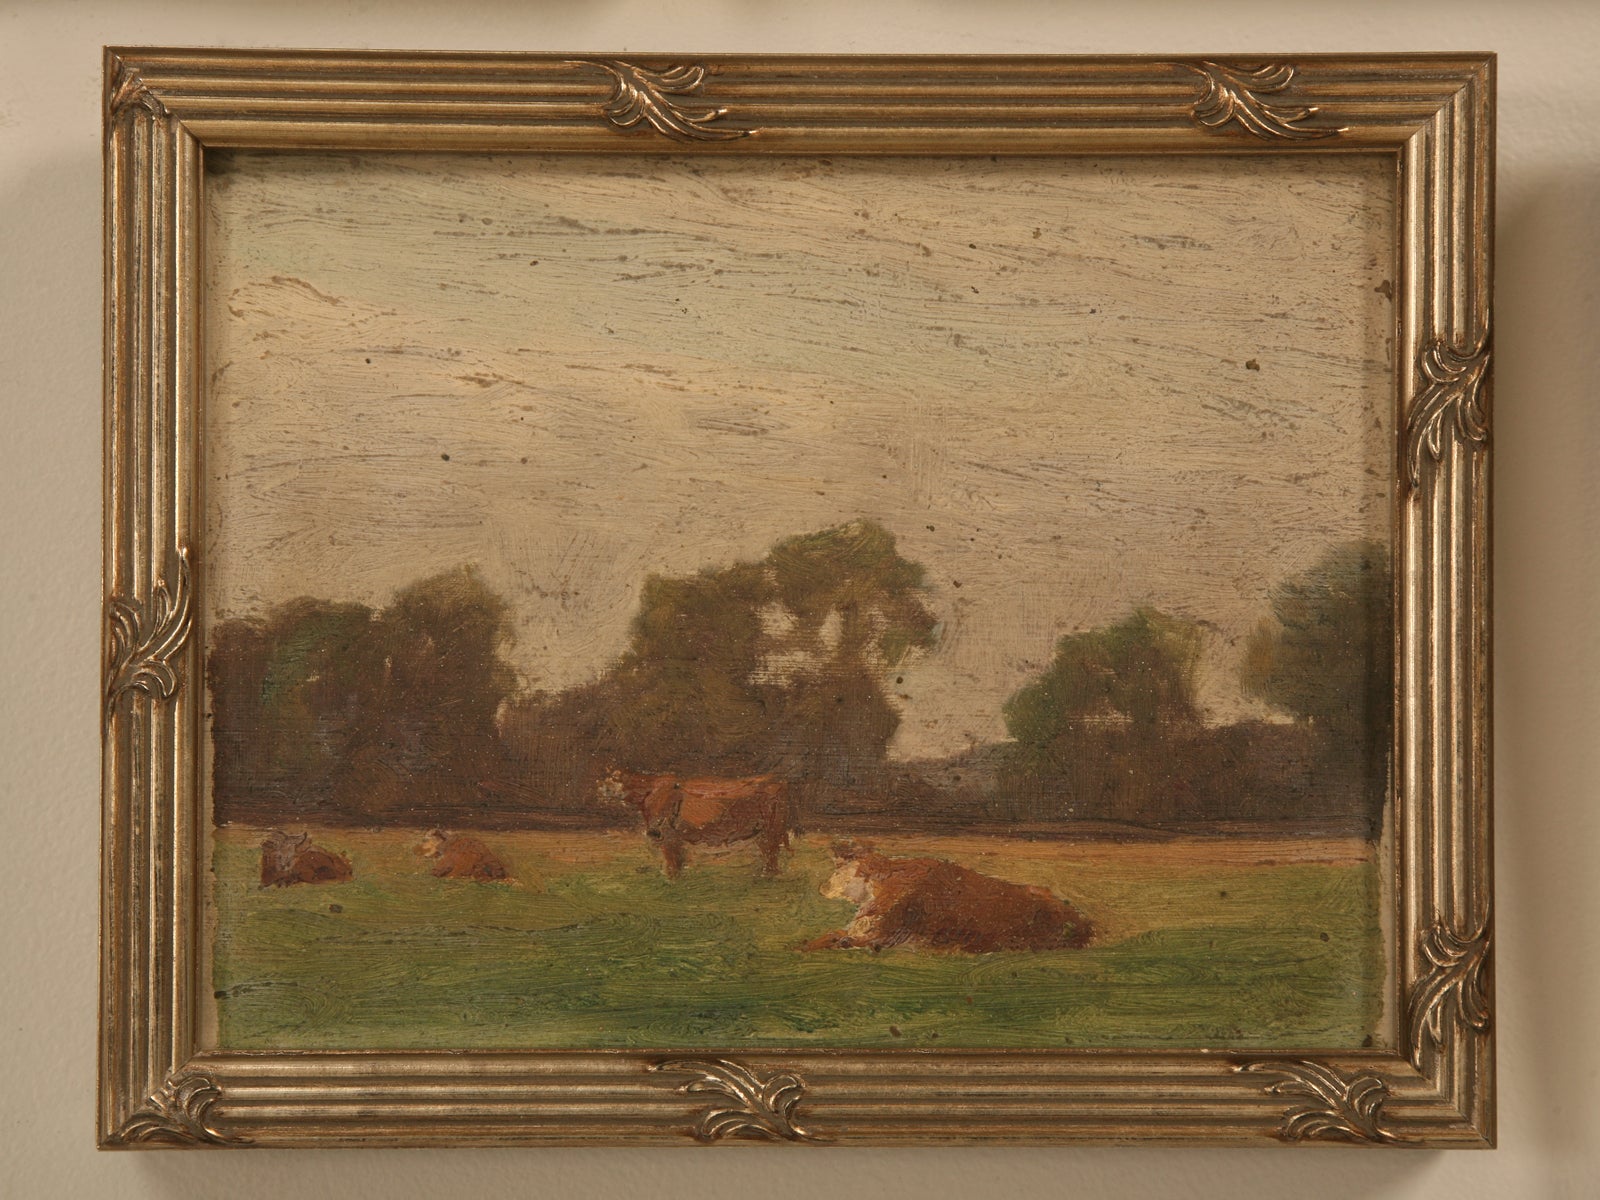 Original Antique French Oil Painting of Cattle in Newer Custom Frame